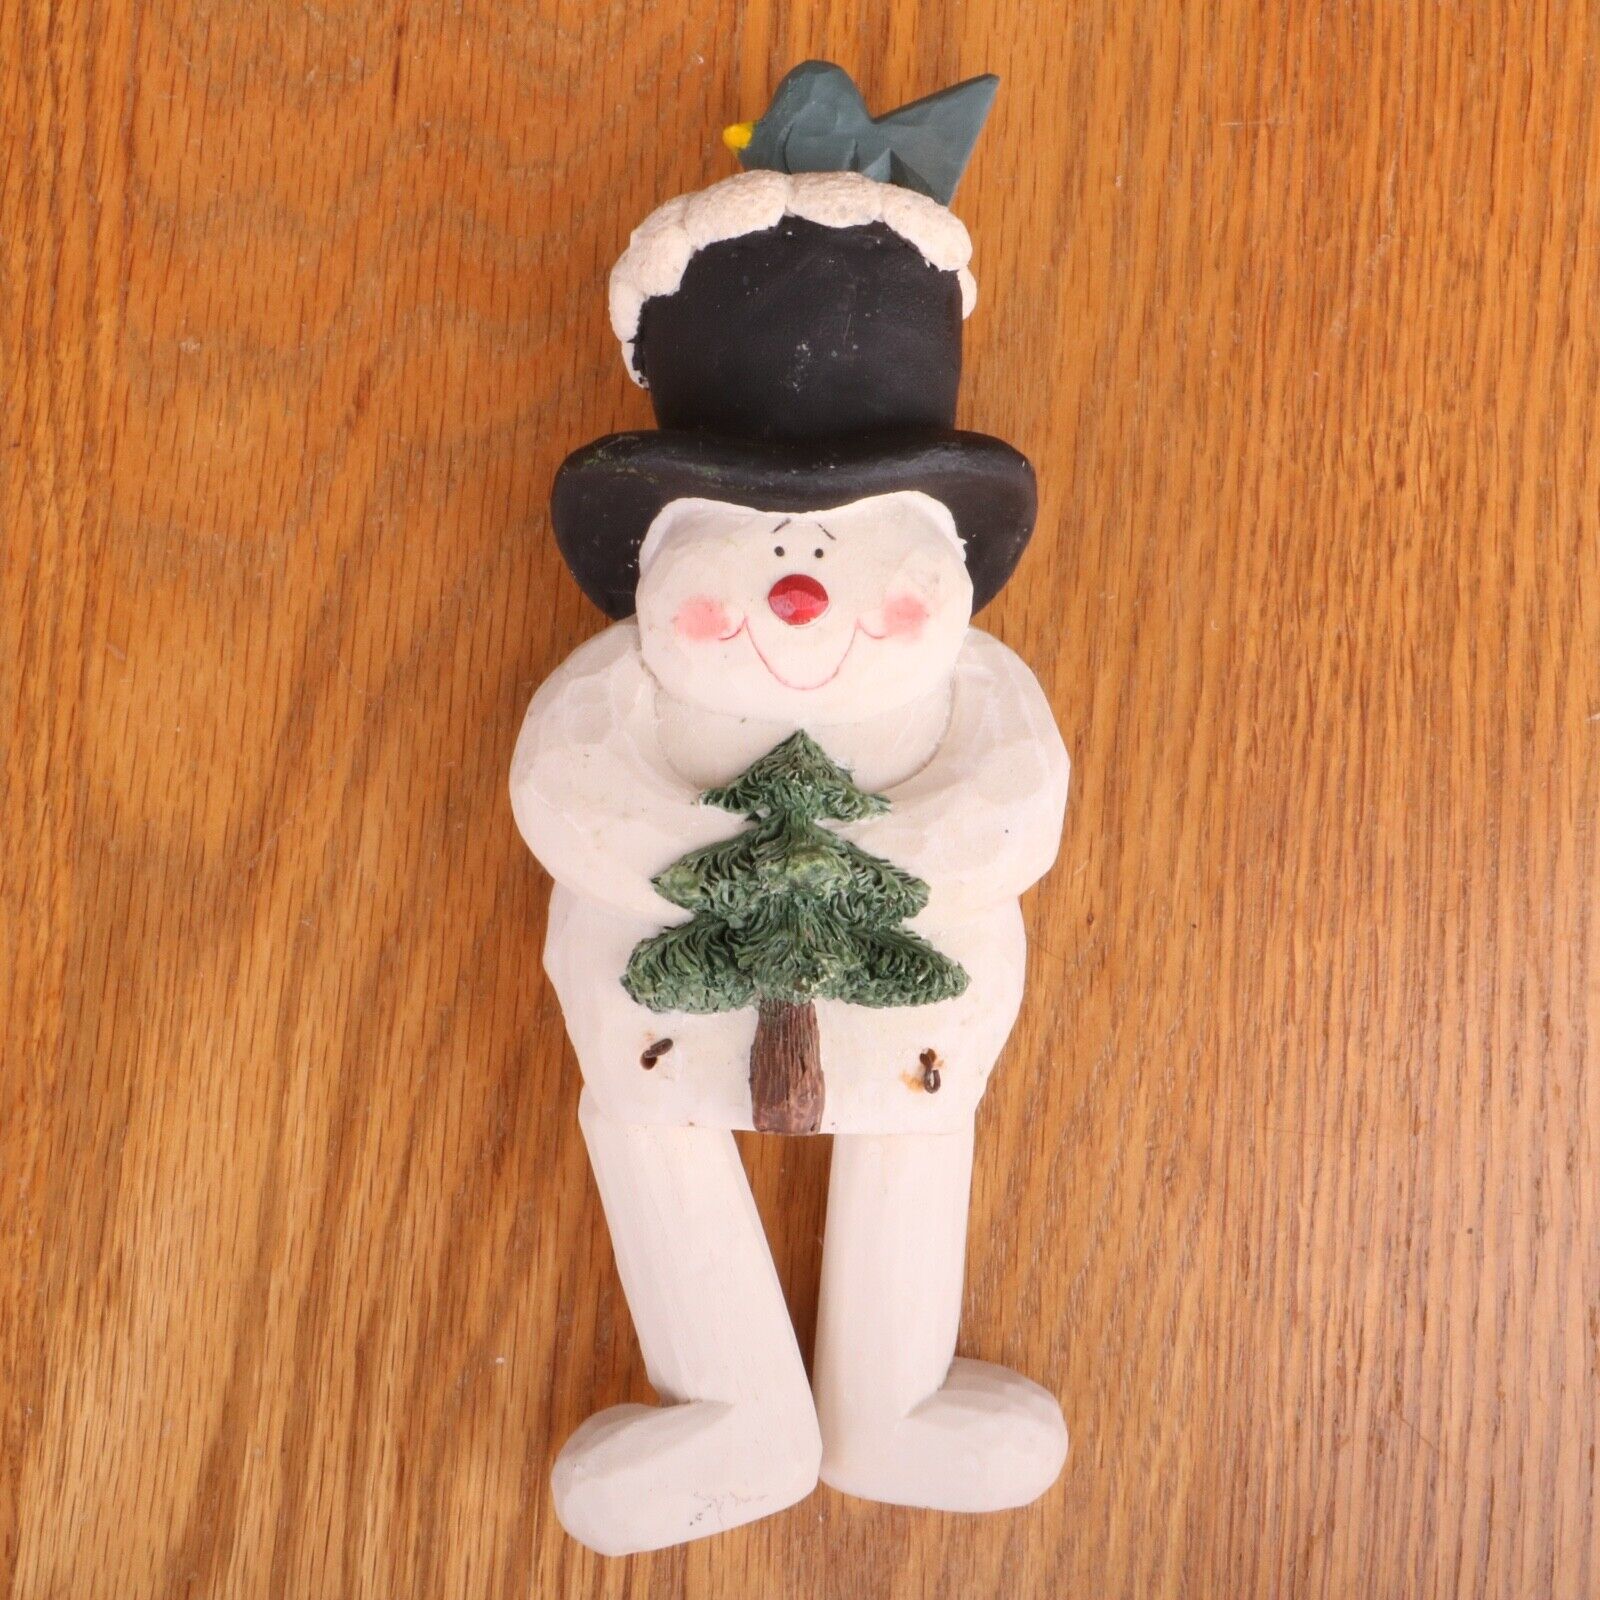 Snowman With With Dangly Legs Bird On Head Holding Christmas Tree Figurine